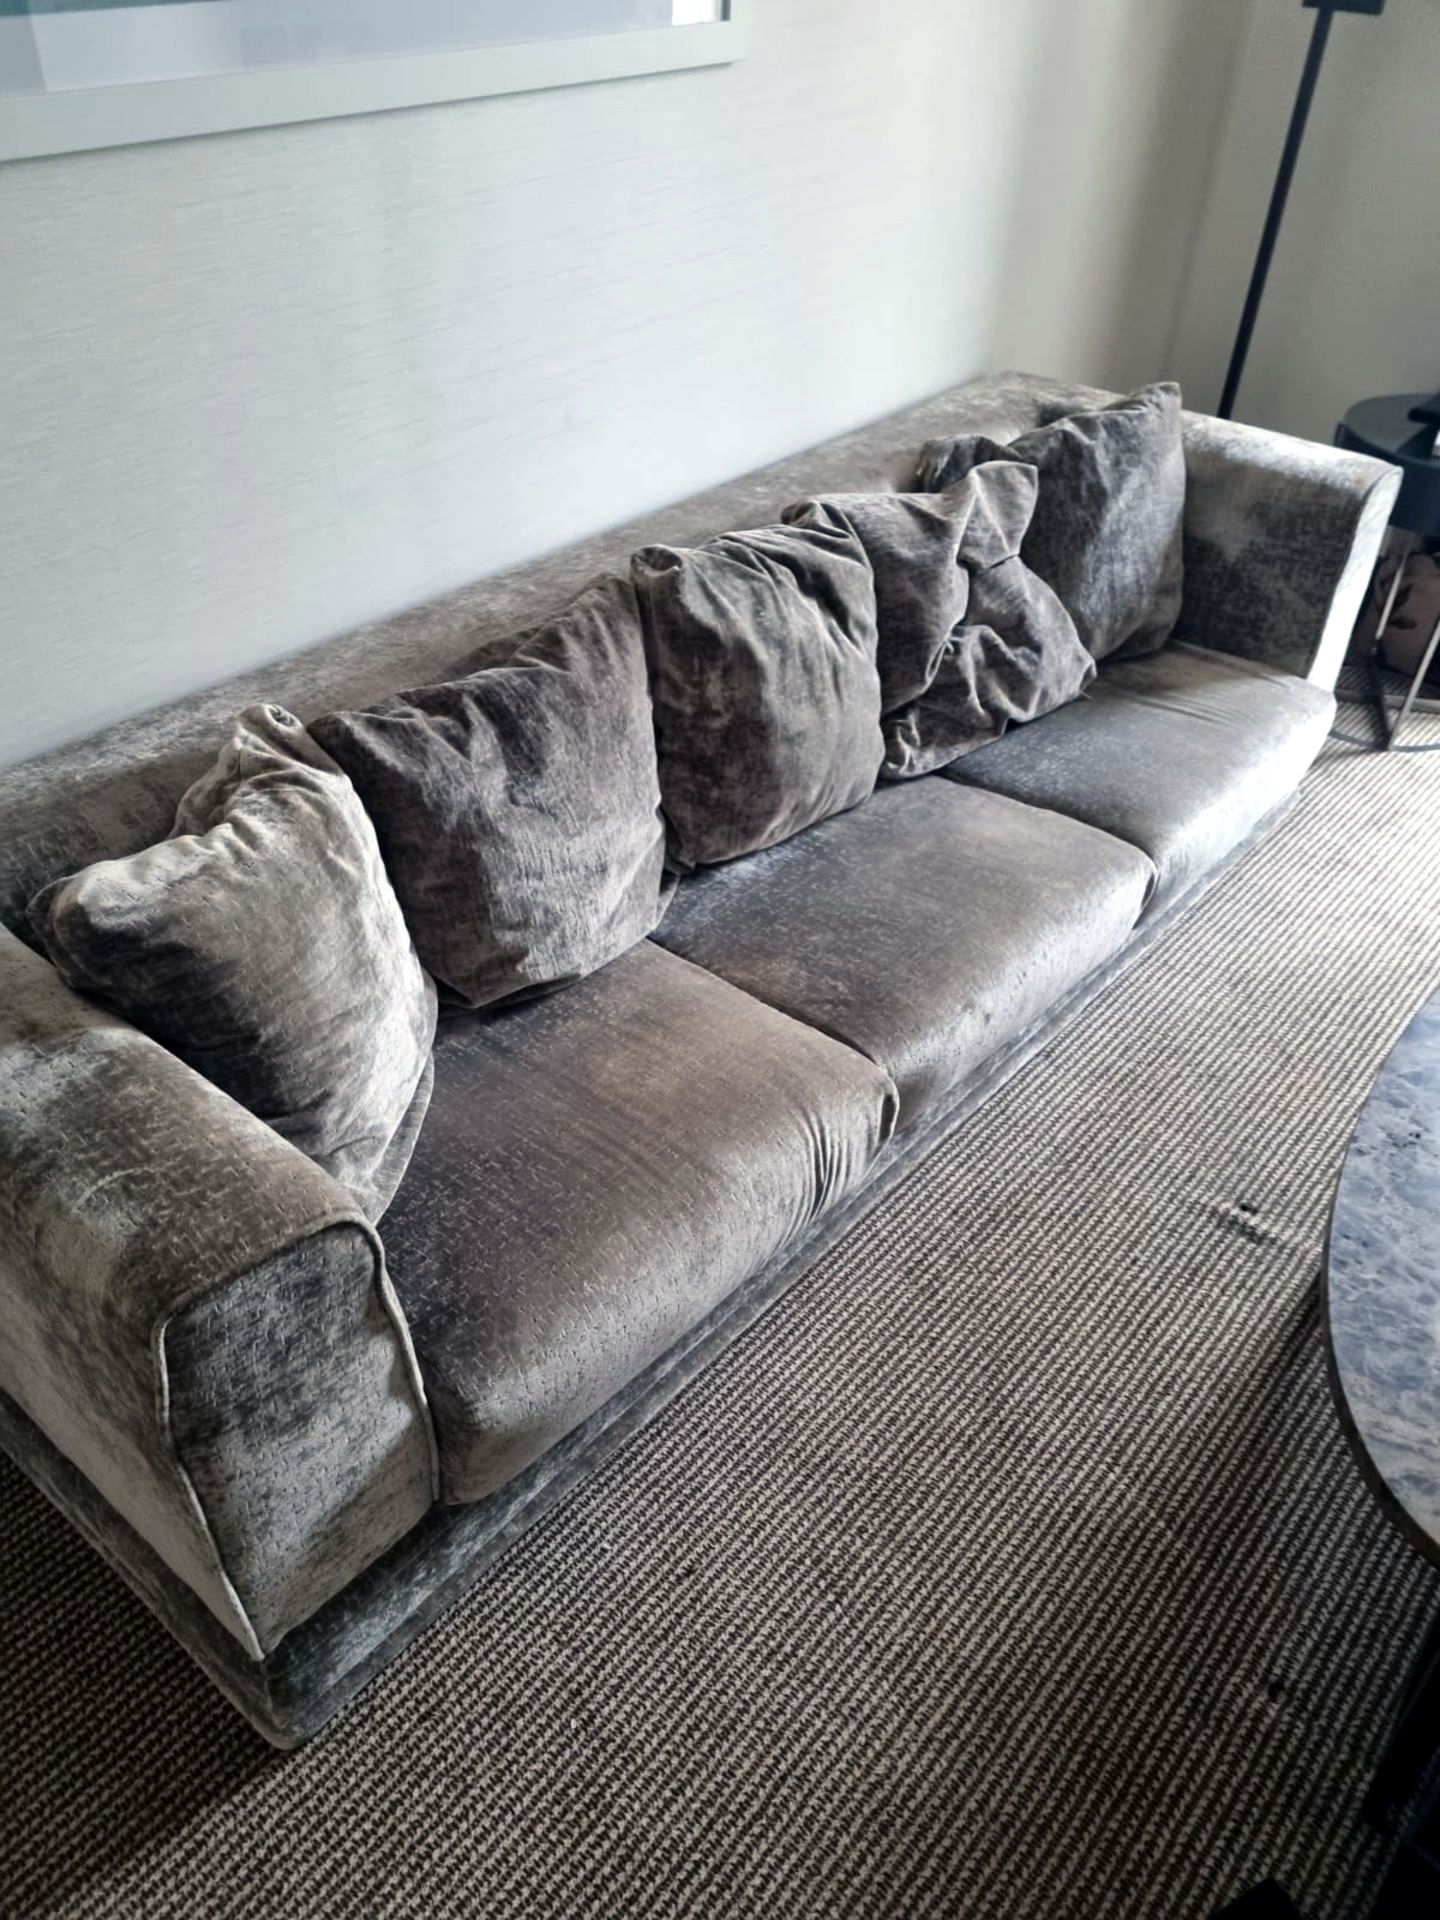 A Velvet Three Seater Sofa Contemporary Design 195 x 85 x 69cm With Loose Cushion Pads And Scatter